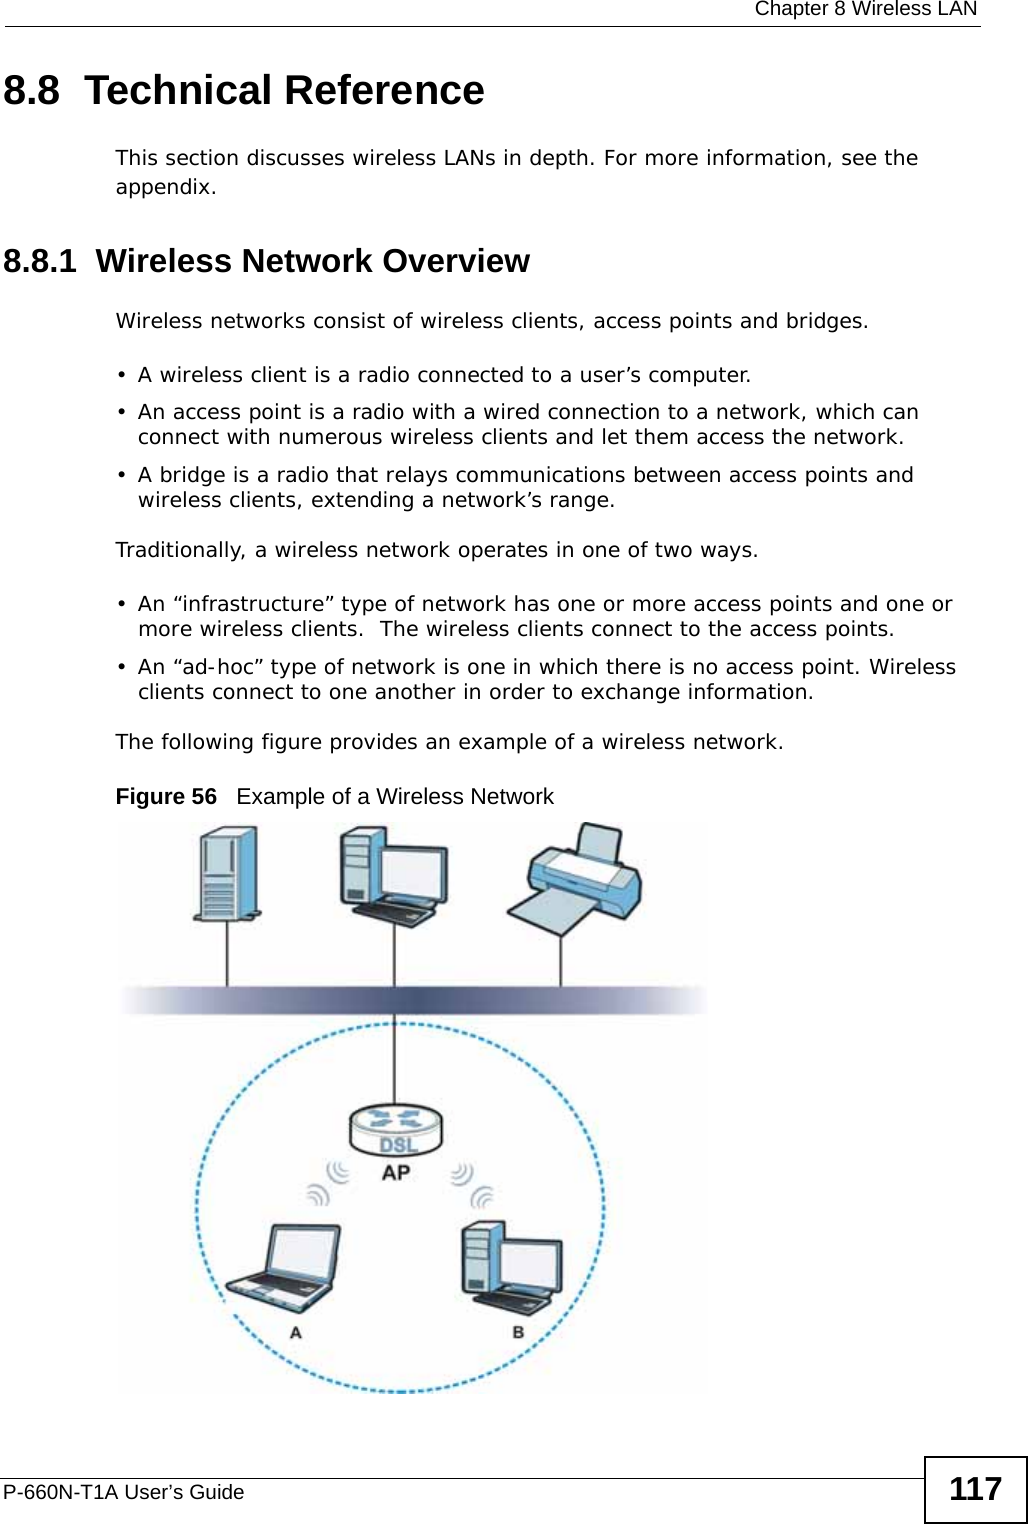  Chapter 8 Wireless LANP-660N-T1A User’s Guide 1178.8  Technical ReferenceThis section discusses wireless LANs in depth. For more information, see the appendix.8.8.1  Wireless Network OverviewWireless networks consist of wireless clients, access points and bridges. • A wireless client is a radio connected to a user’s computer. • An access point is a radio with a wired connection to a network, which can connect with numerous wireless clients and let them access the network. • A bridge is a radio that relays communications between access points and wireless clients, extending a network’s range. Traditionally, a wireless network operates in one of two ways.• An “infrastructure” type of network has one or more access points and one or more wireless clients.  The wireless clients connect to the access points.• An “ad-hoc” type of network is one in which there is no access point. Wireless clients connect to one another in order to exchange information.The following figure provides an example of a wireless network.Figure 56   Example of a Wireless Network